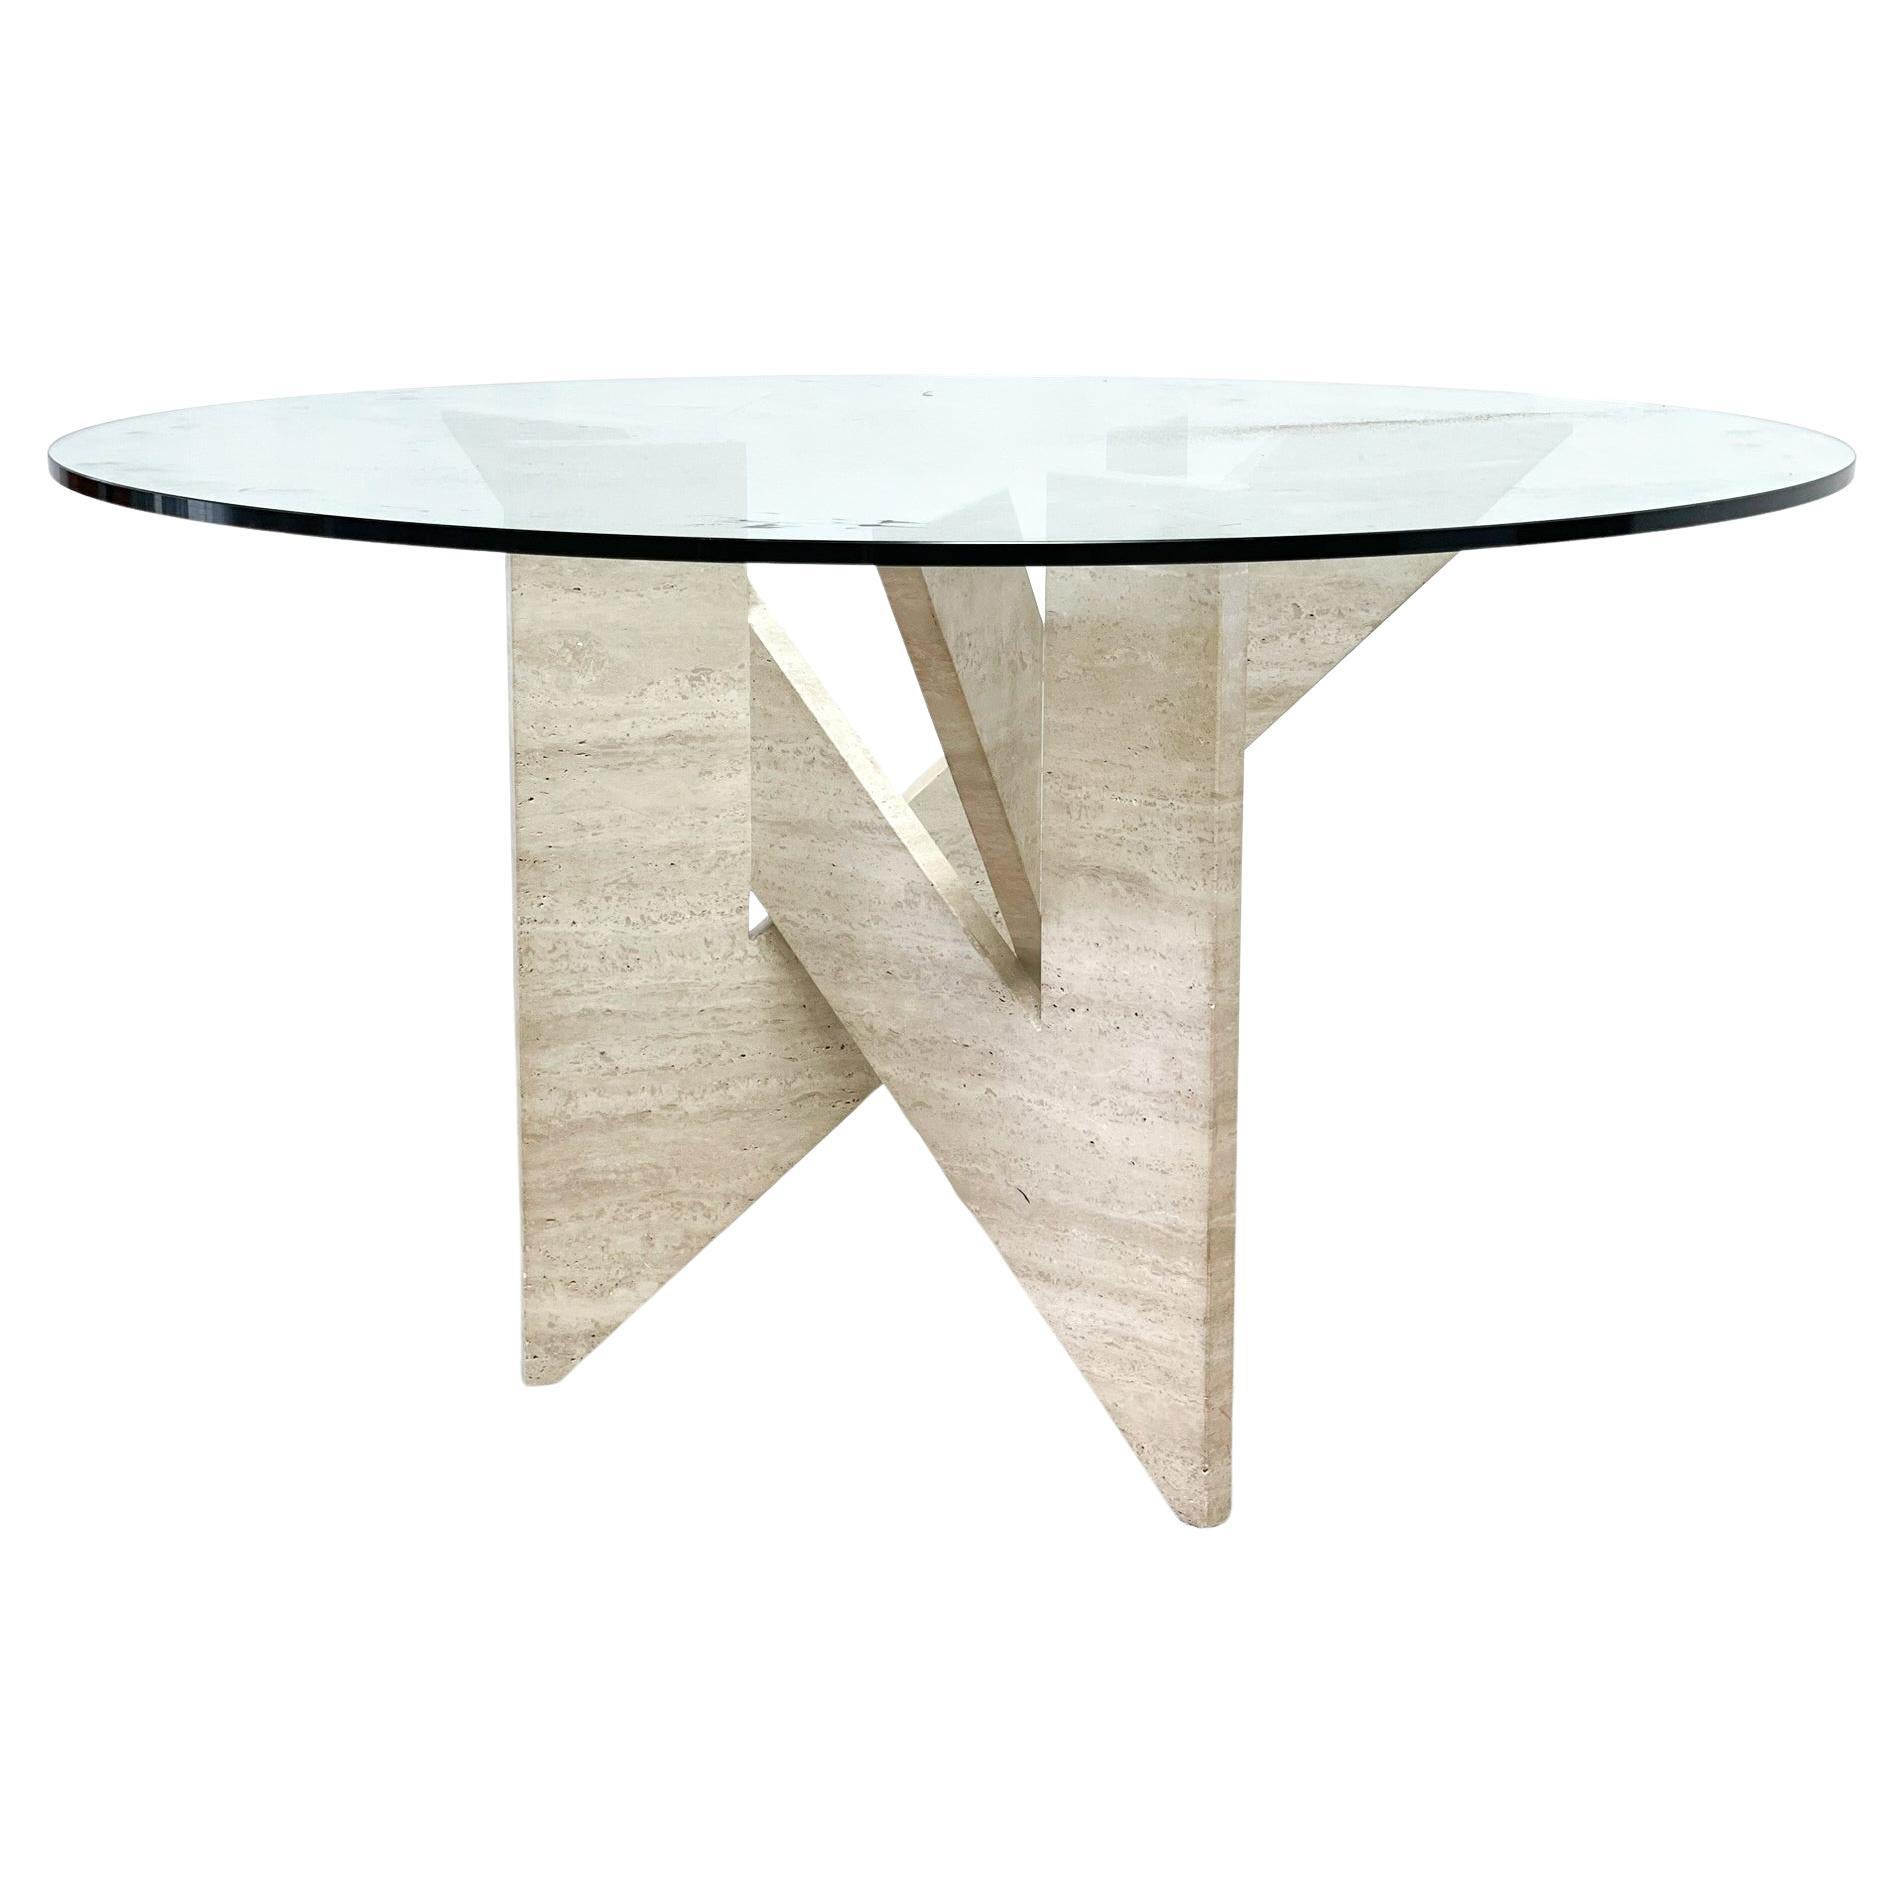 Architectural Travertine Dining Table, 1970s For Sale